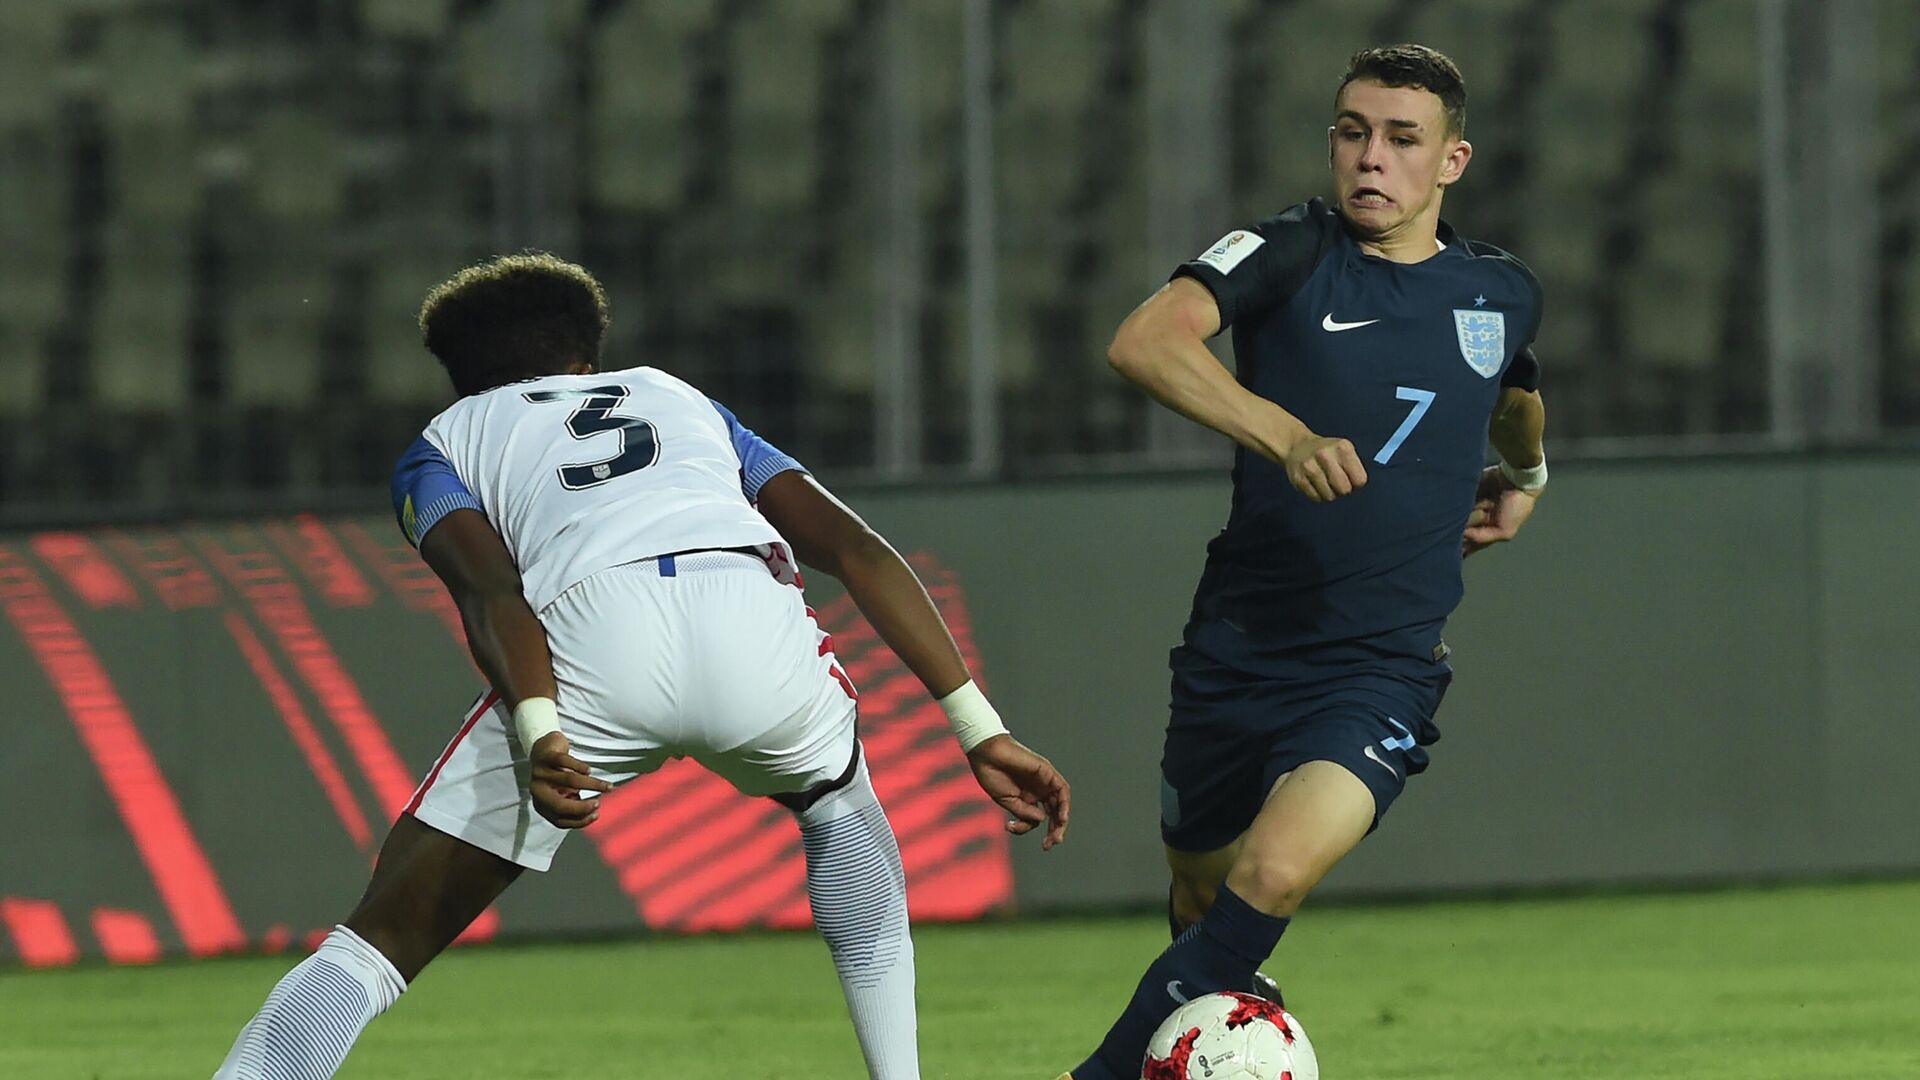 Philip Foden (R) of England dribbles past Chris Gloster of USA during the quarterfinal football match between USA and England in the FIFA U-17 World Cup at the Jawaharlal Nehru Stadium in Goa on October 21, 2017. (Photo by INDRANIL MUKHERJEE / AFP) - РИА Новости, 1920, 07.09.2020